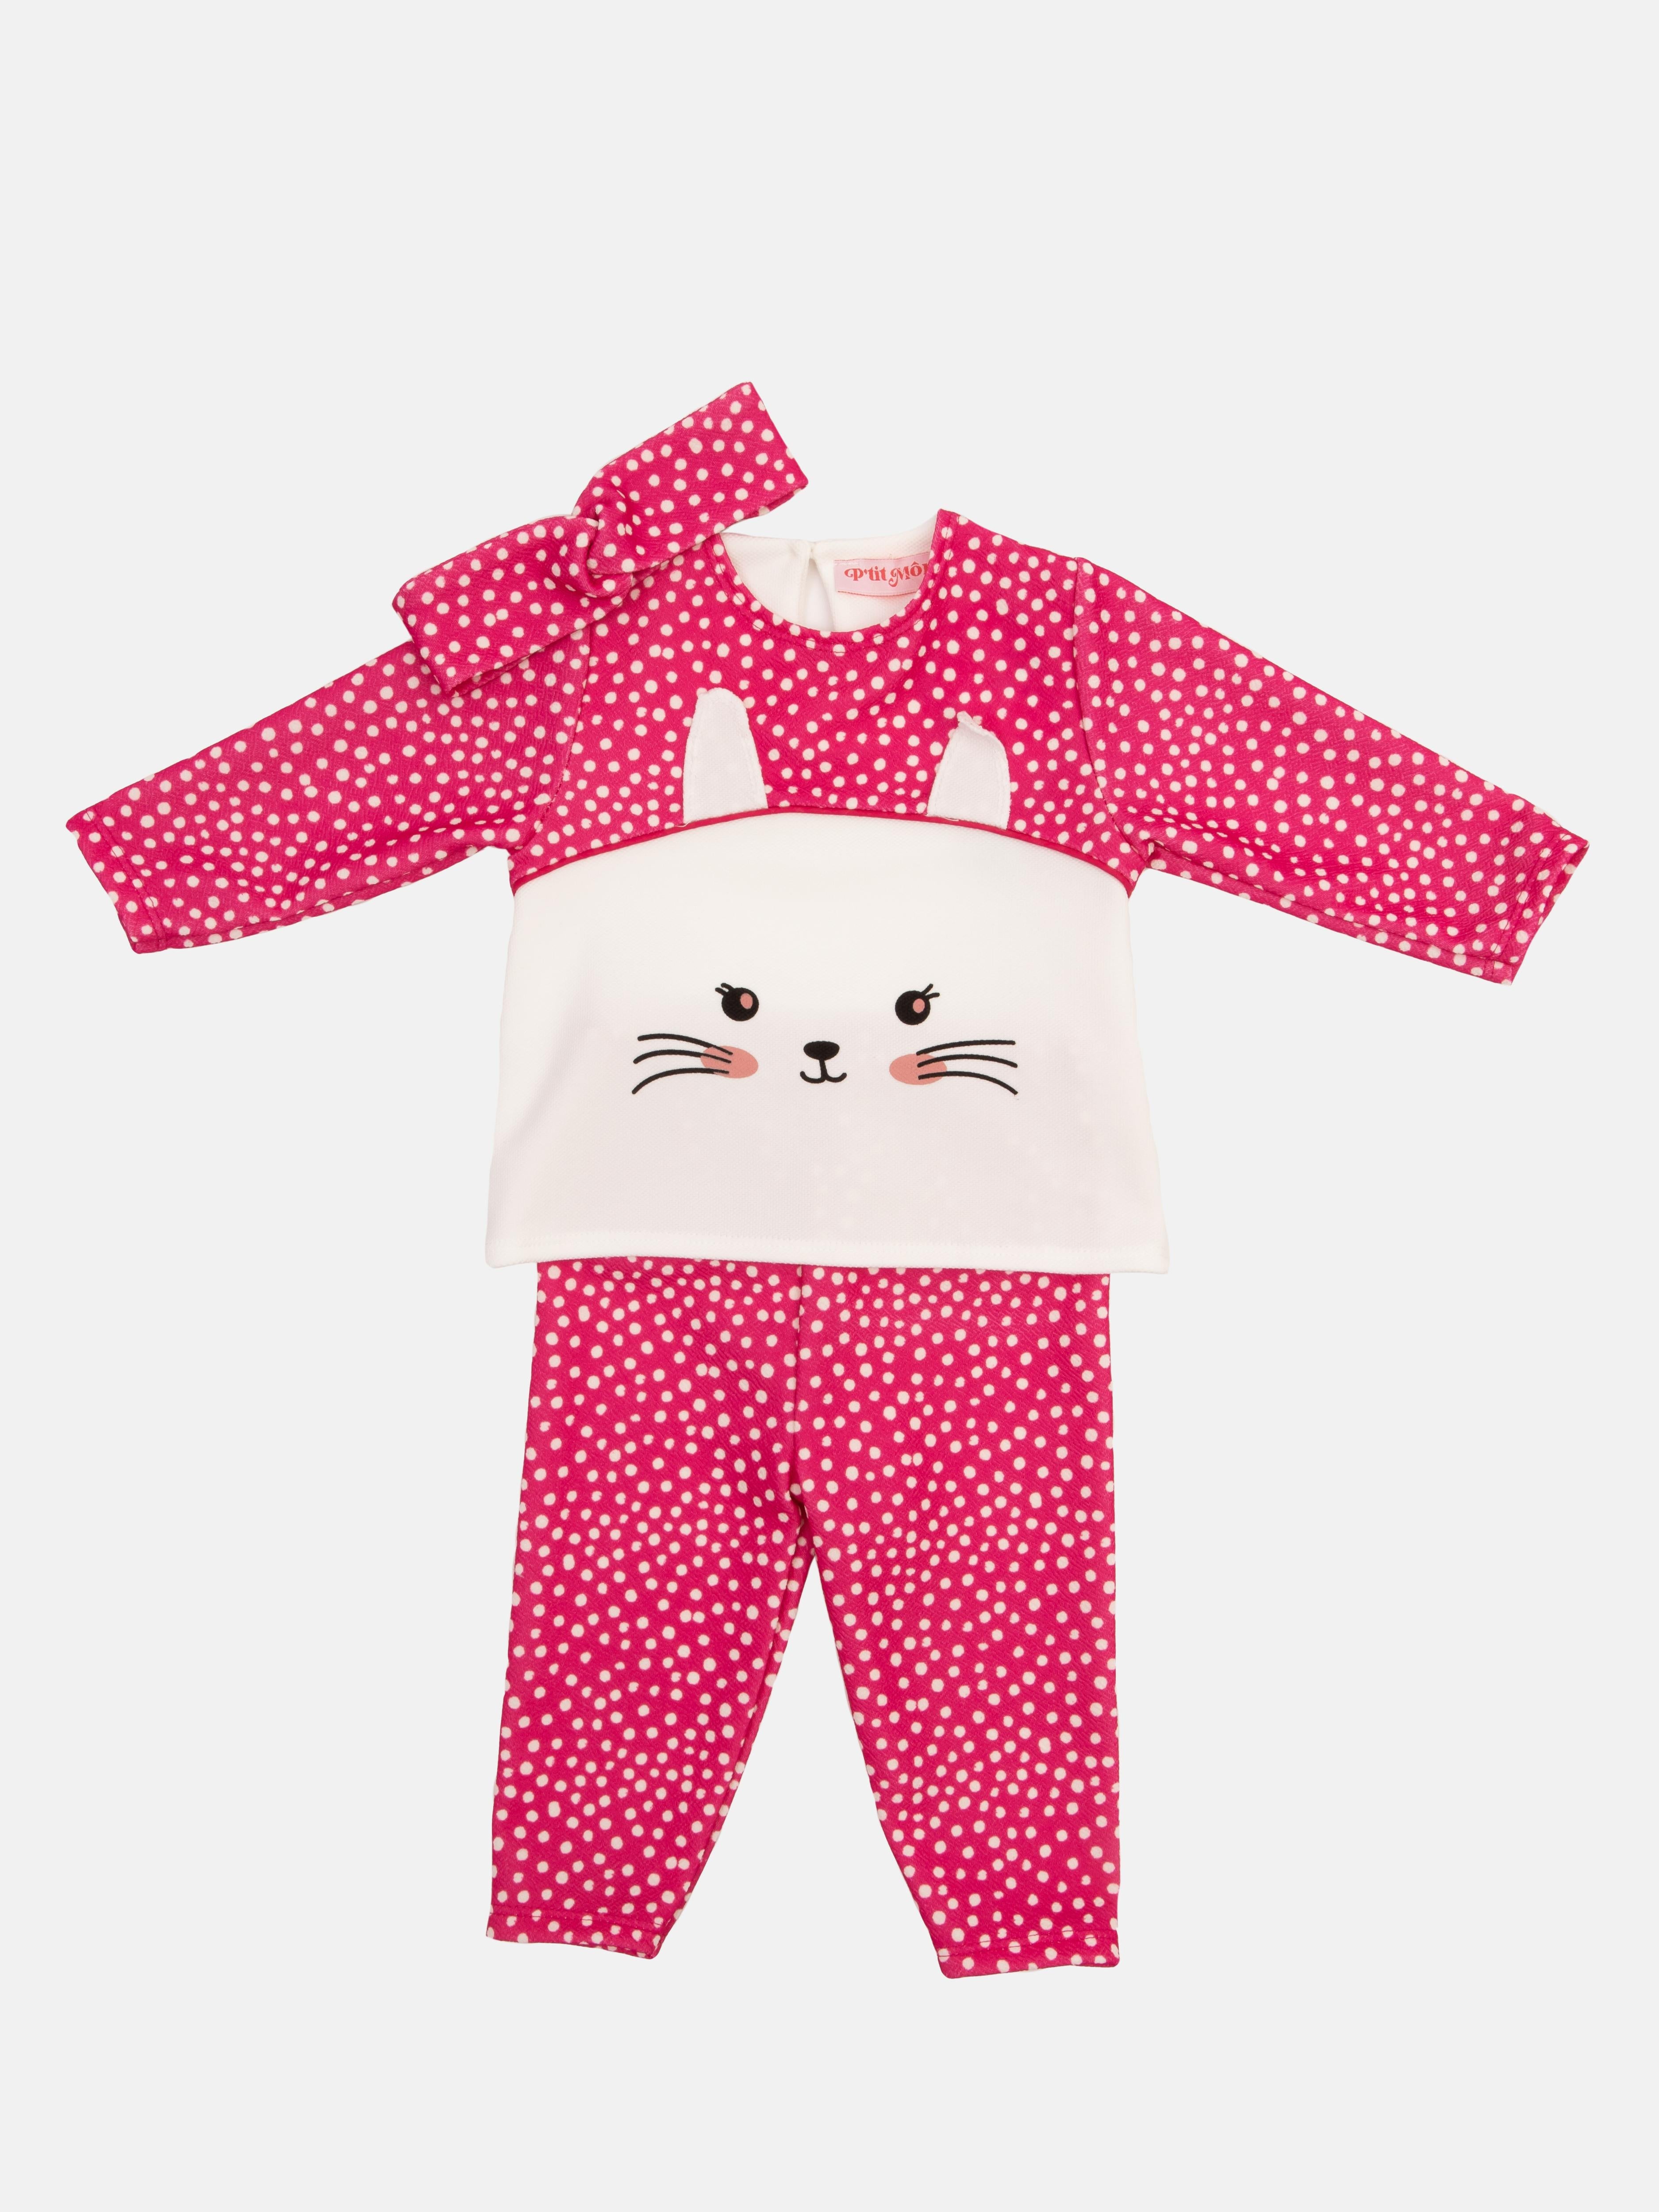 Baby Girl Kitty Cat French Collection 3-piece Polka Dot Top, Pants and Headband Set - Fuchsia Pink